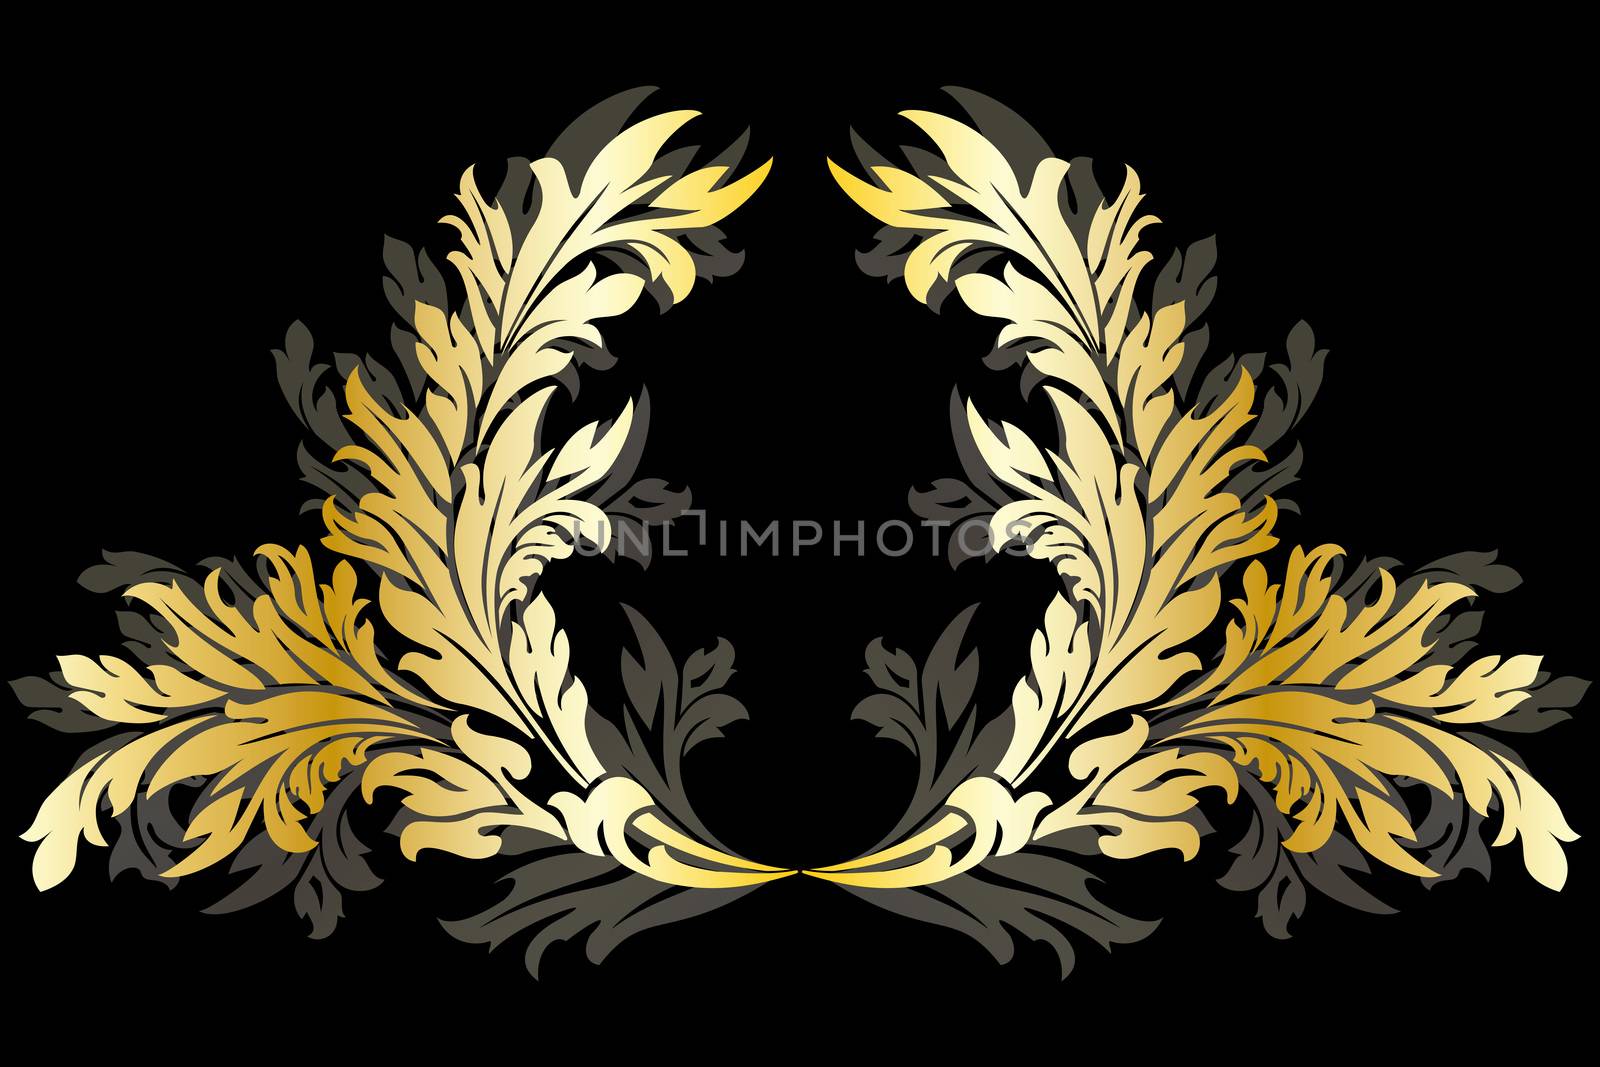 Abstract ancient floral Garland isolated on black